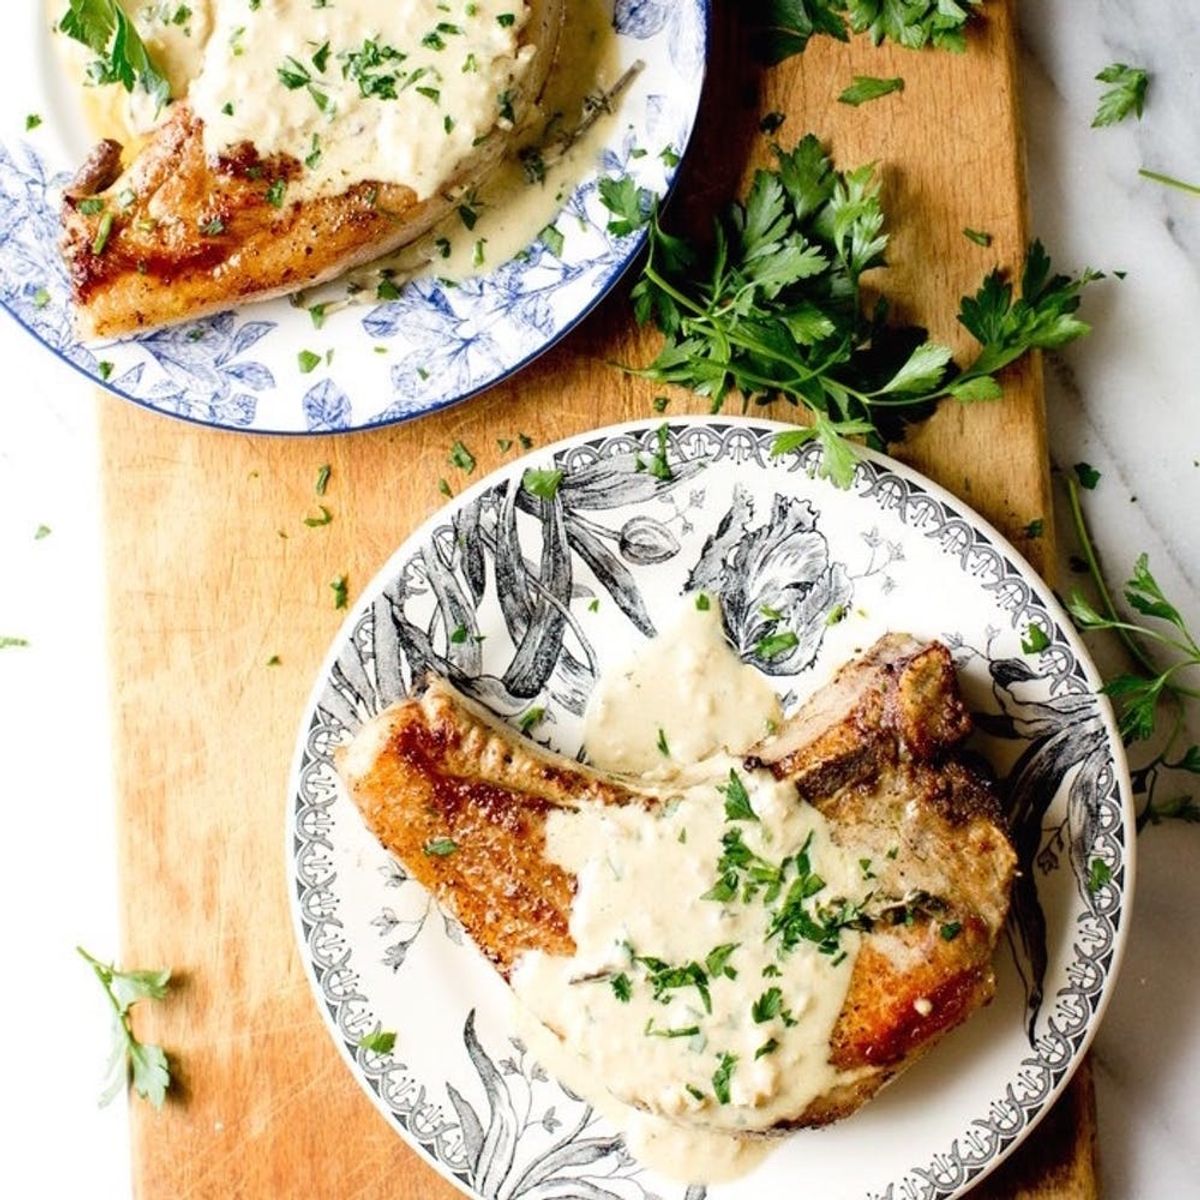 18 Reasons to Make Pork Chops Your New Fave Weeknight Meal